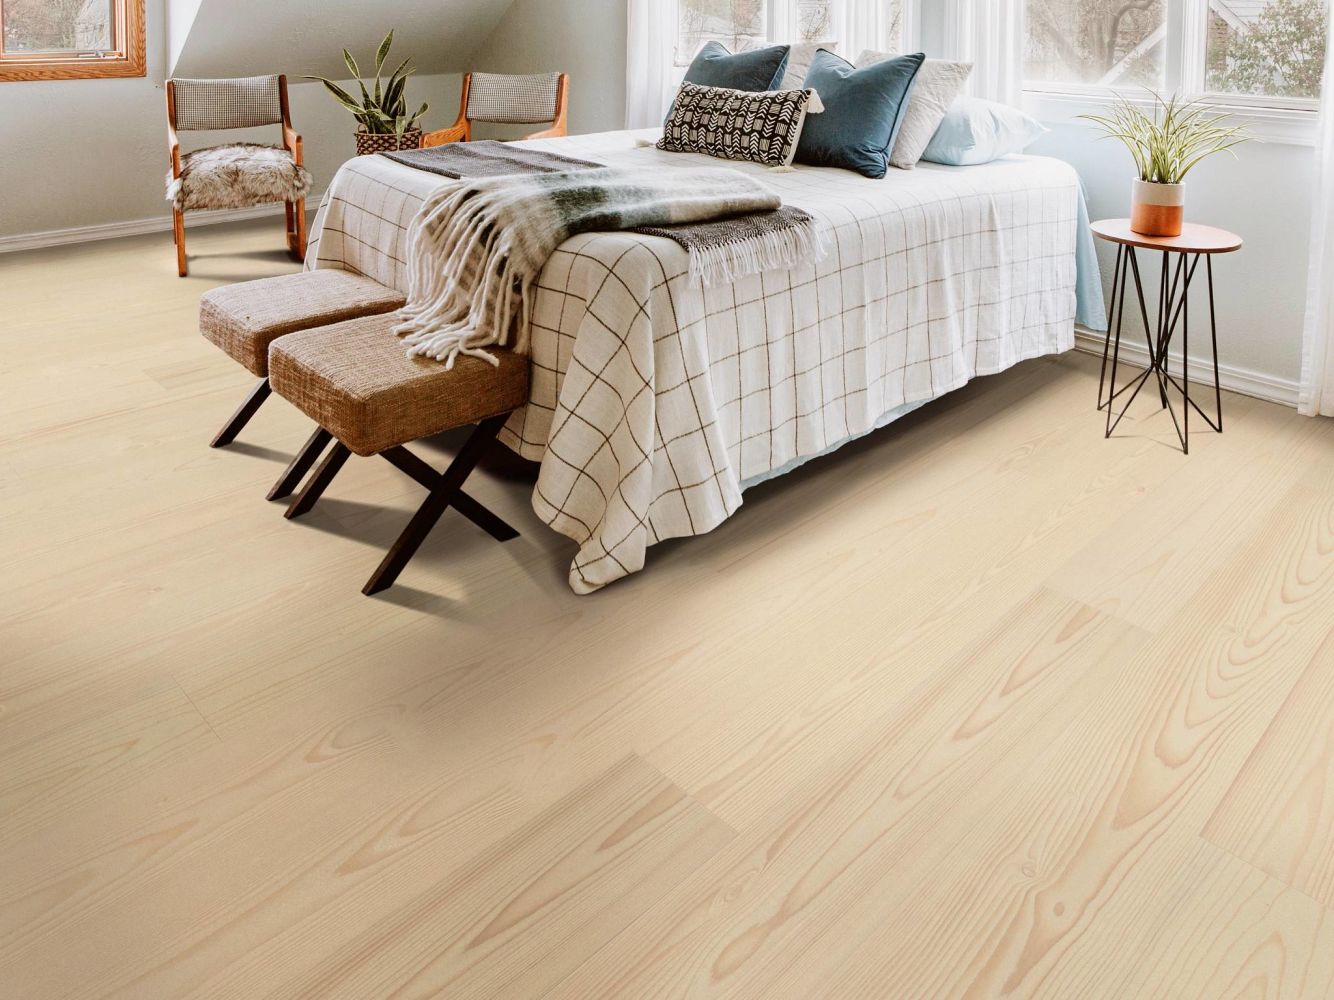 Shaw Floors Resilient Residential Prodigy Hdr Mxl Plus Antique 02041_2039V